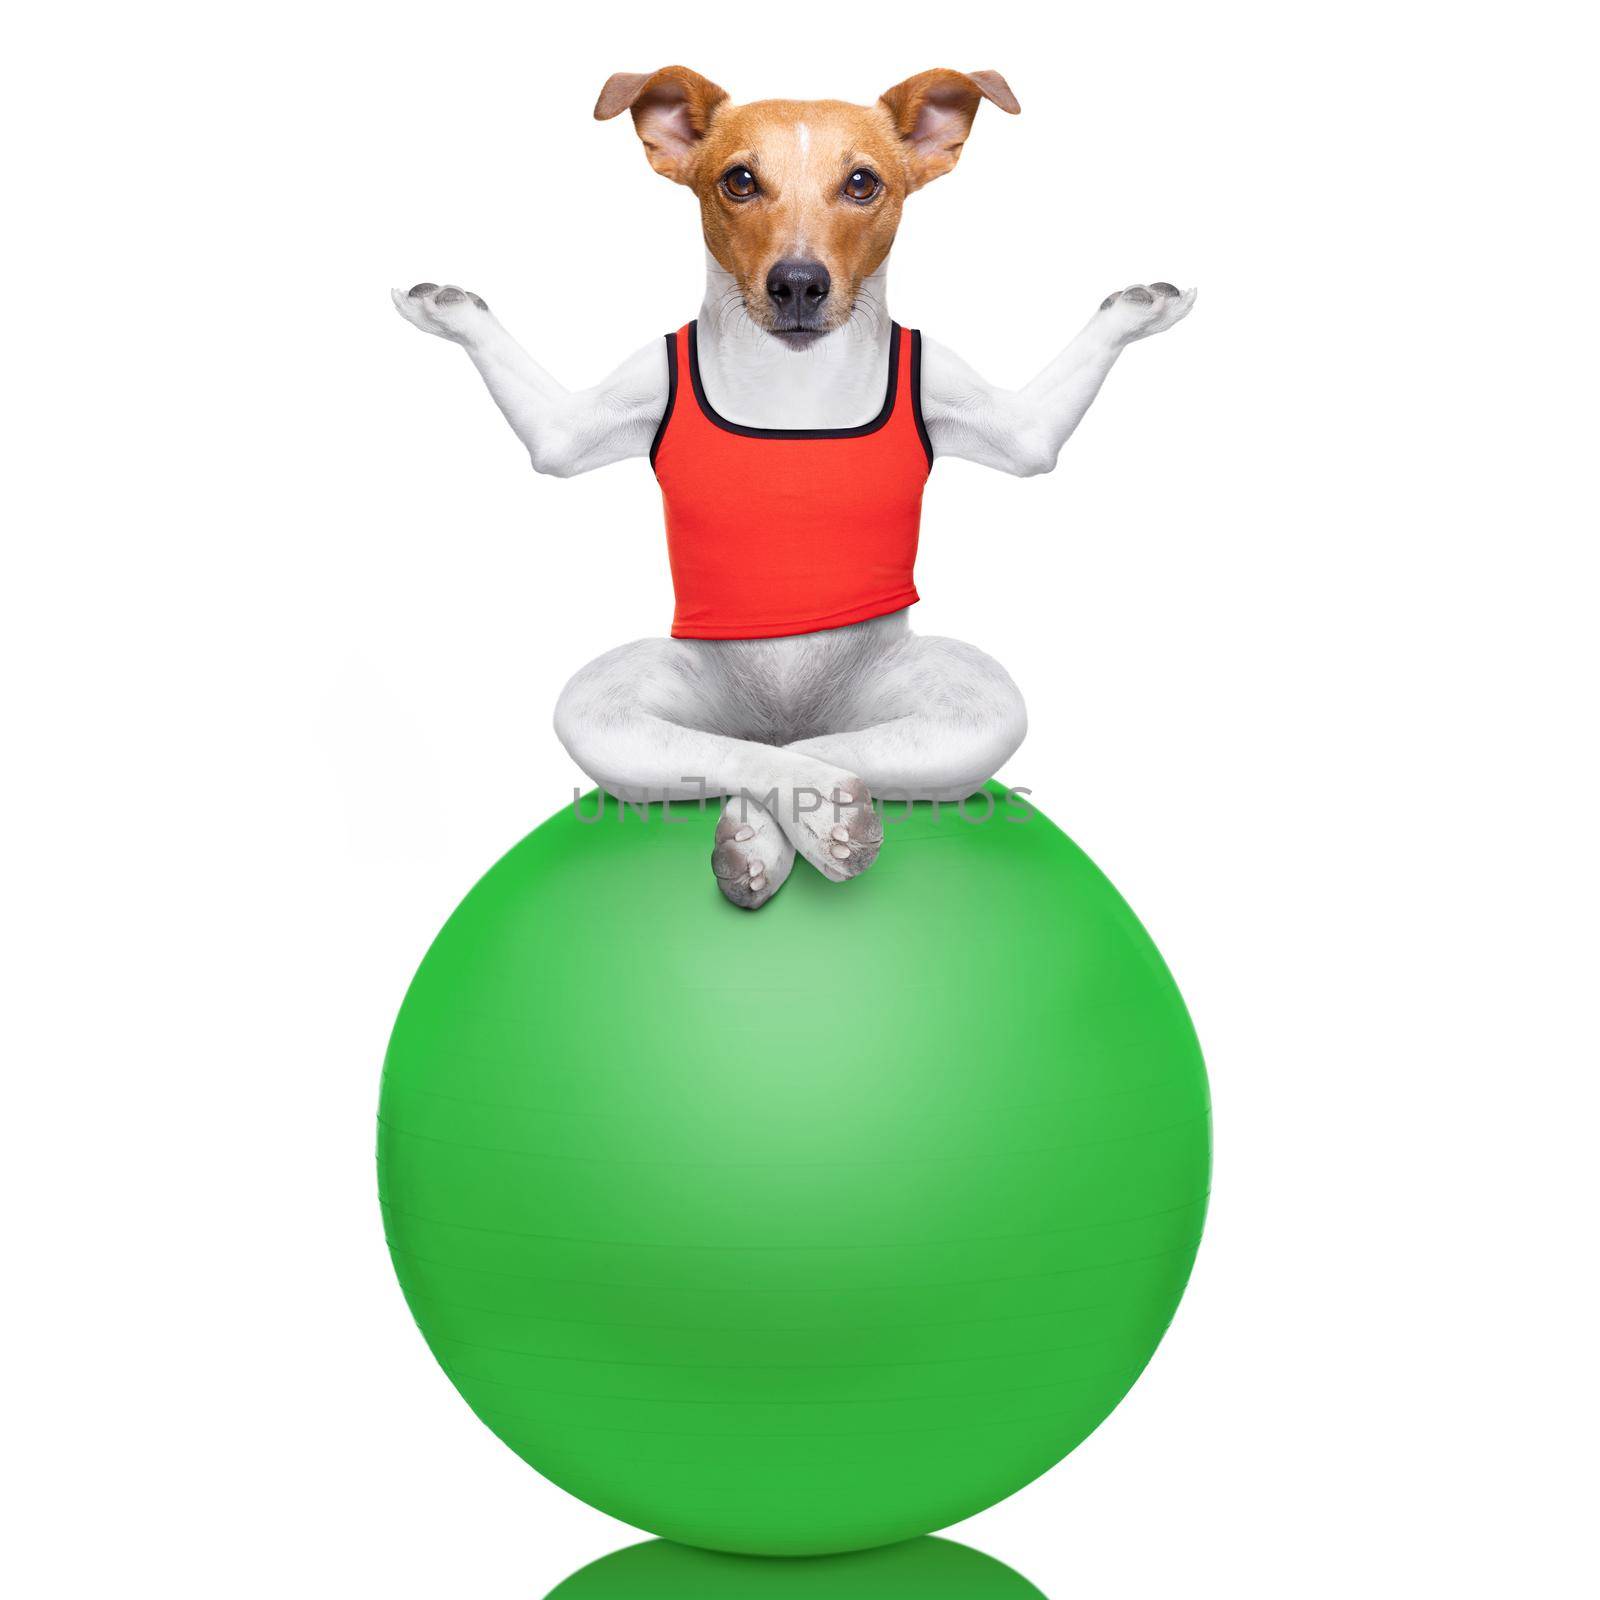 yoga dog posing in a relaxing pose with both arms open and closed eyes balancing on a gym ball,  isolated on white background